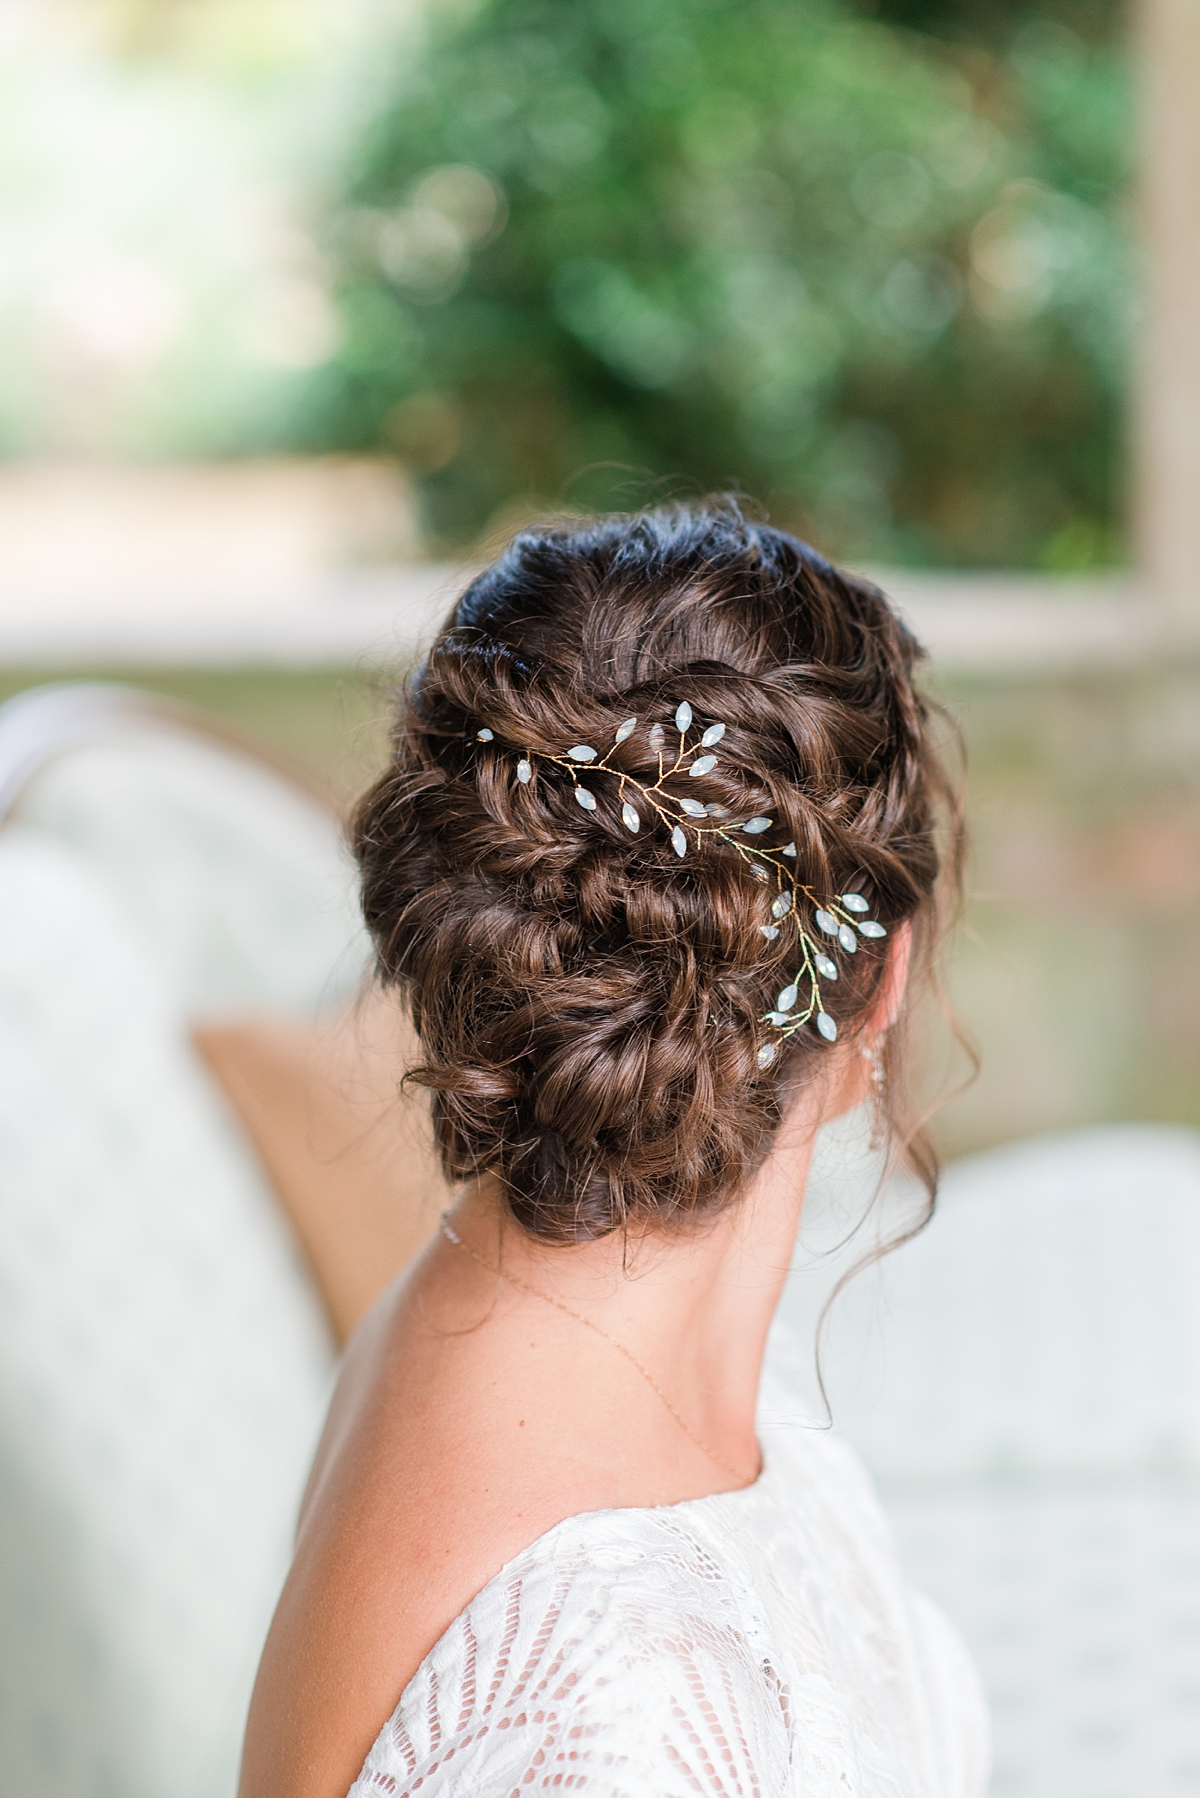 Whimsical Bridal Portraits of Stunning Wedding Day Braided Updo Hairstyle at Virginia House Fall Wedding. Hair by Samantha Mullins, Wedding Photography by Virginia Wedding Photographer Kailey Brianne Photography. 